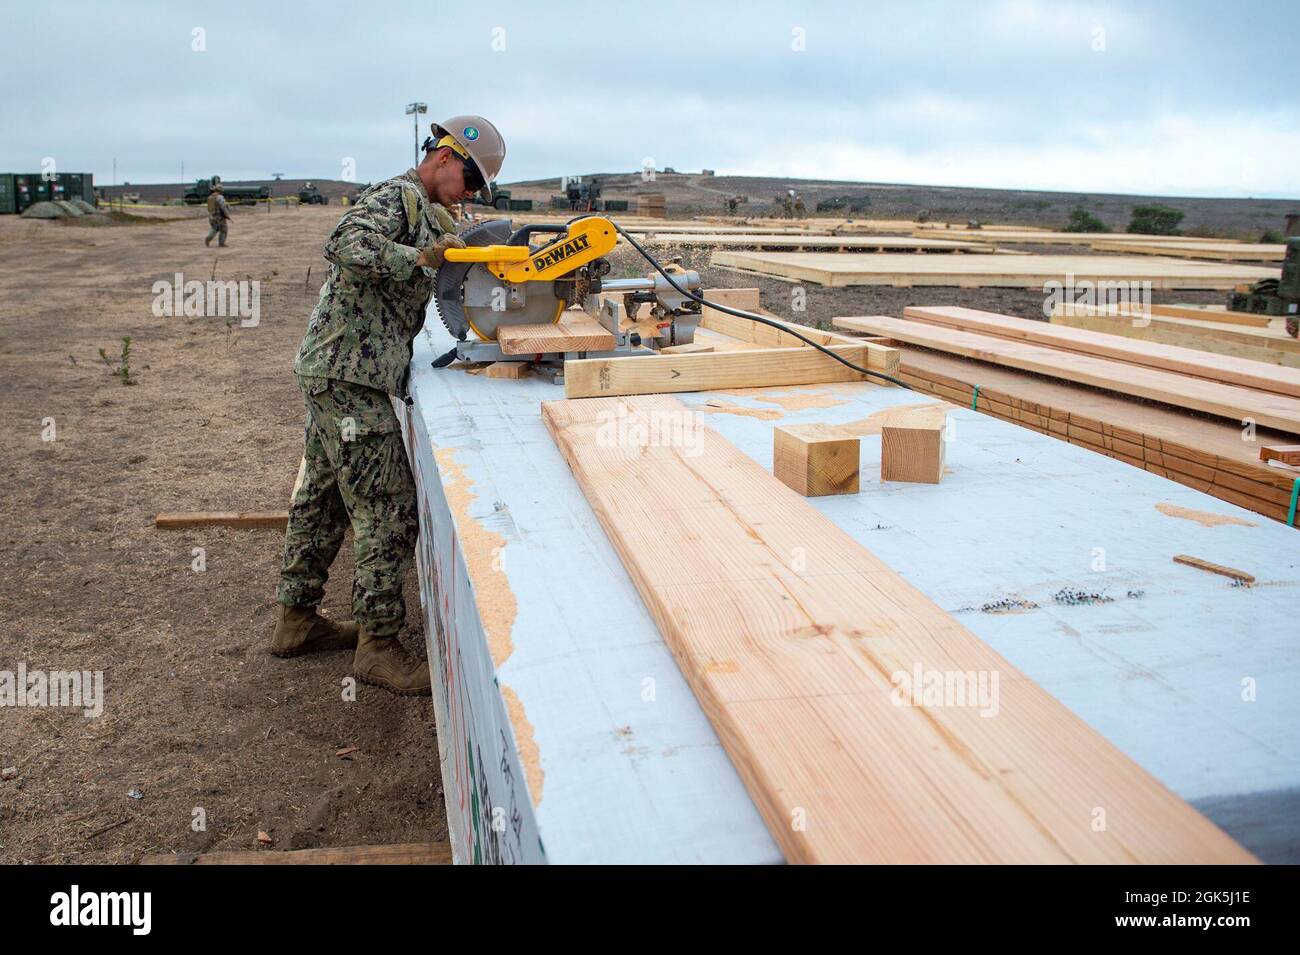 210808-N-TP832-1041 SAN CLEMENTE ISLAND, Calif. (Aug. 8, 2021) Builder Constructionman Cameron Boyd, assigned to U.S. Naval Mobile Construction Battalion 3, cuts mud sills for tent decks for construction and support of Expeditionary Advanced Base and Advanced Naval Base Operations as part of Exercise TURNING POINT. TURNING POINT is a major combat operations readiness generation exercise for the Pacific Naval Construction Force designed to support and enable fleet maneuver and logistics. Stock Photo